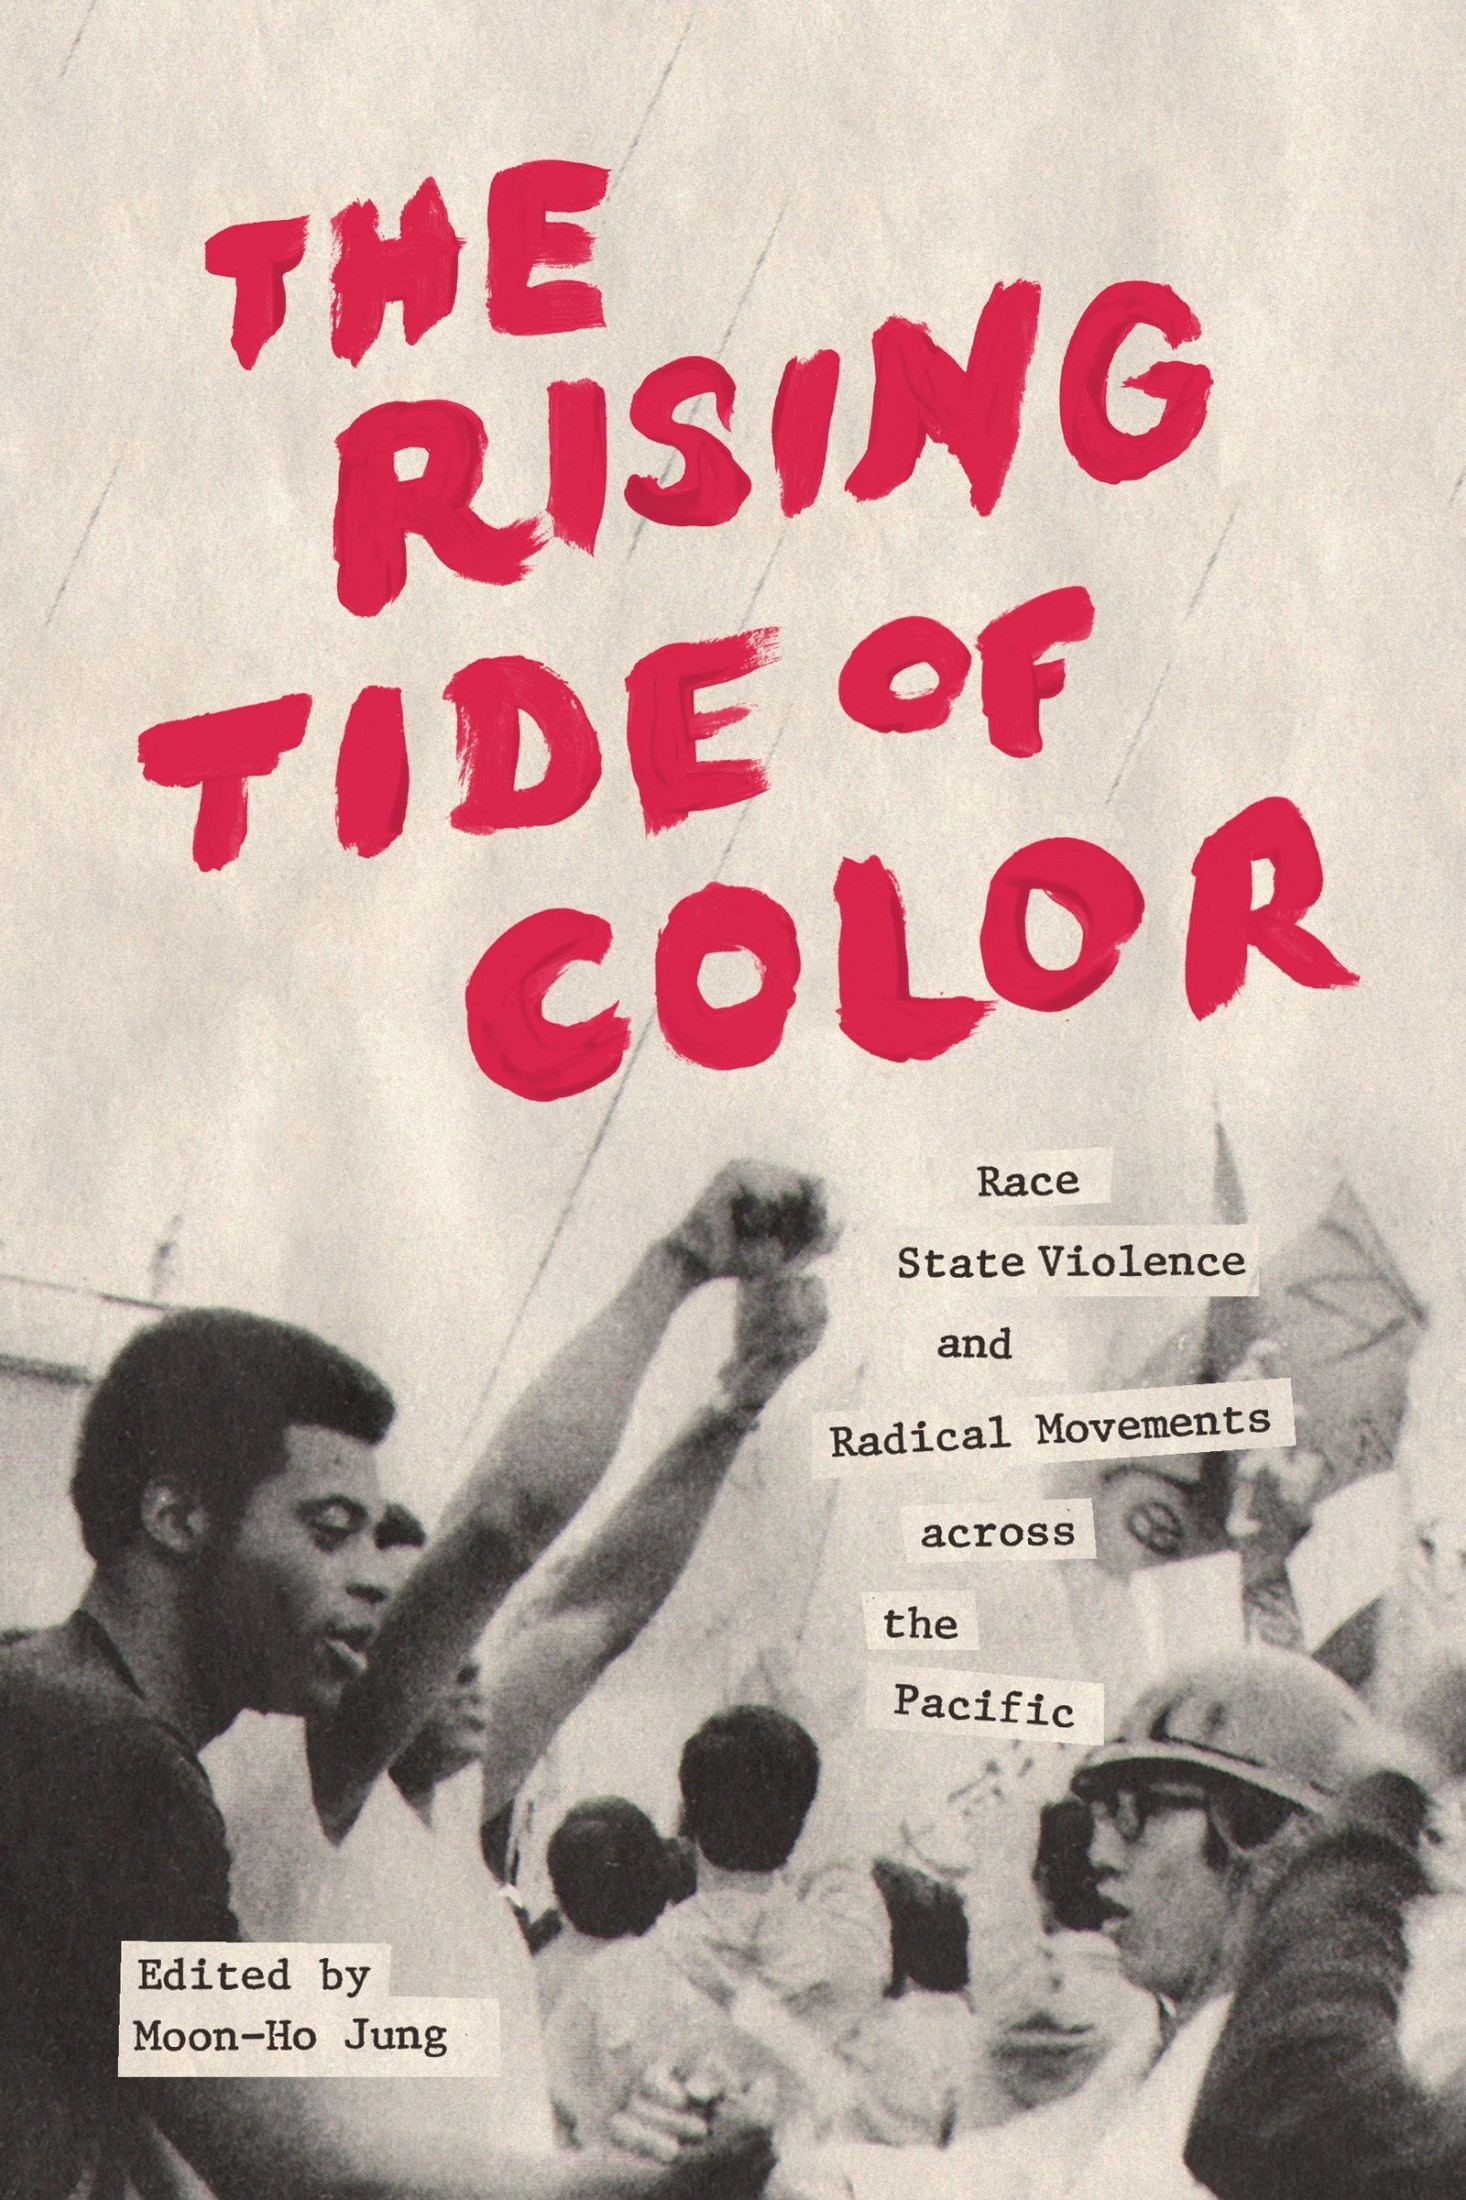 The Rising Tide of Color: Race, State Violence, and Radical Movements Across the Pacific